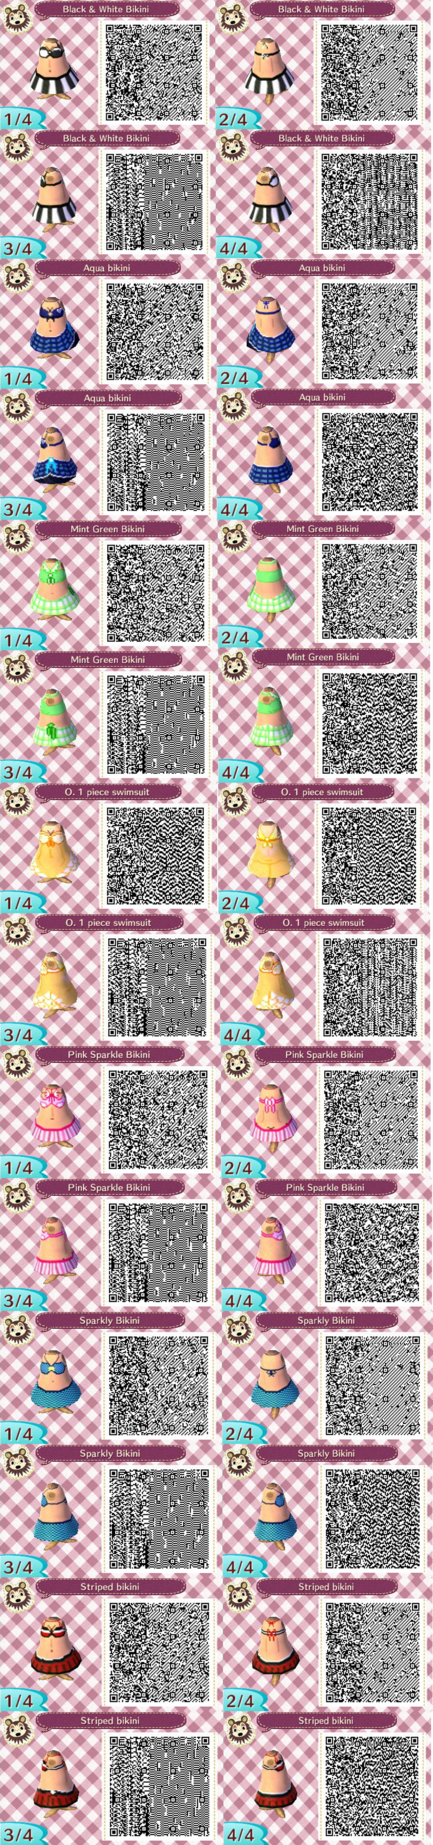 Acnl Female Swimsuit Collection By Qr Codez